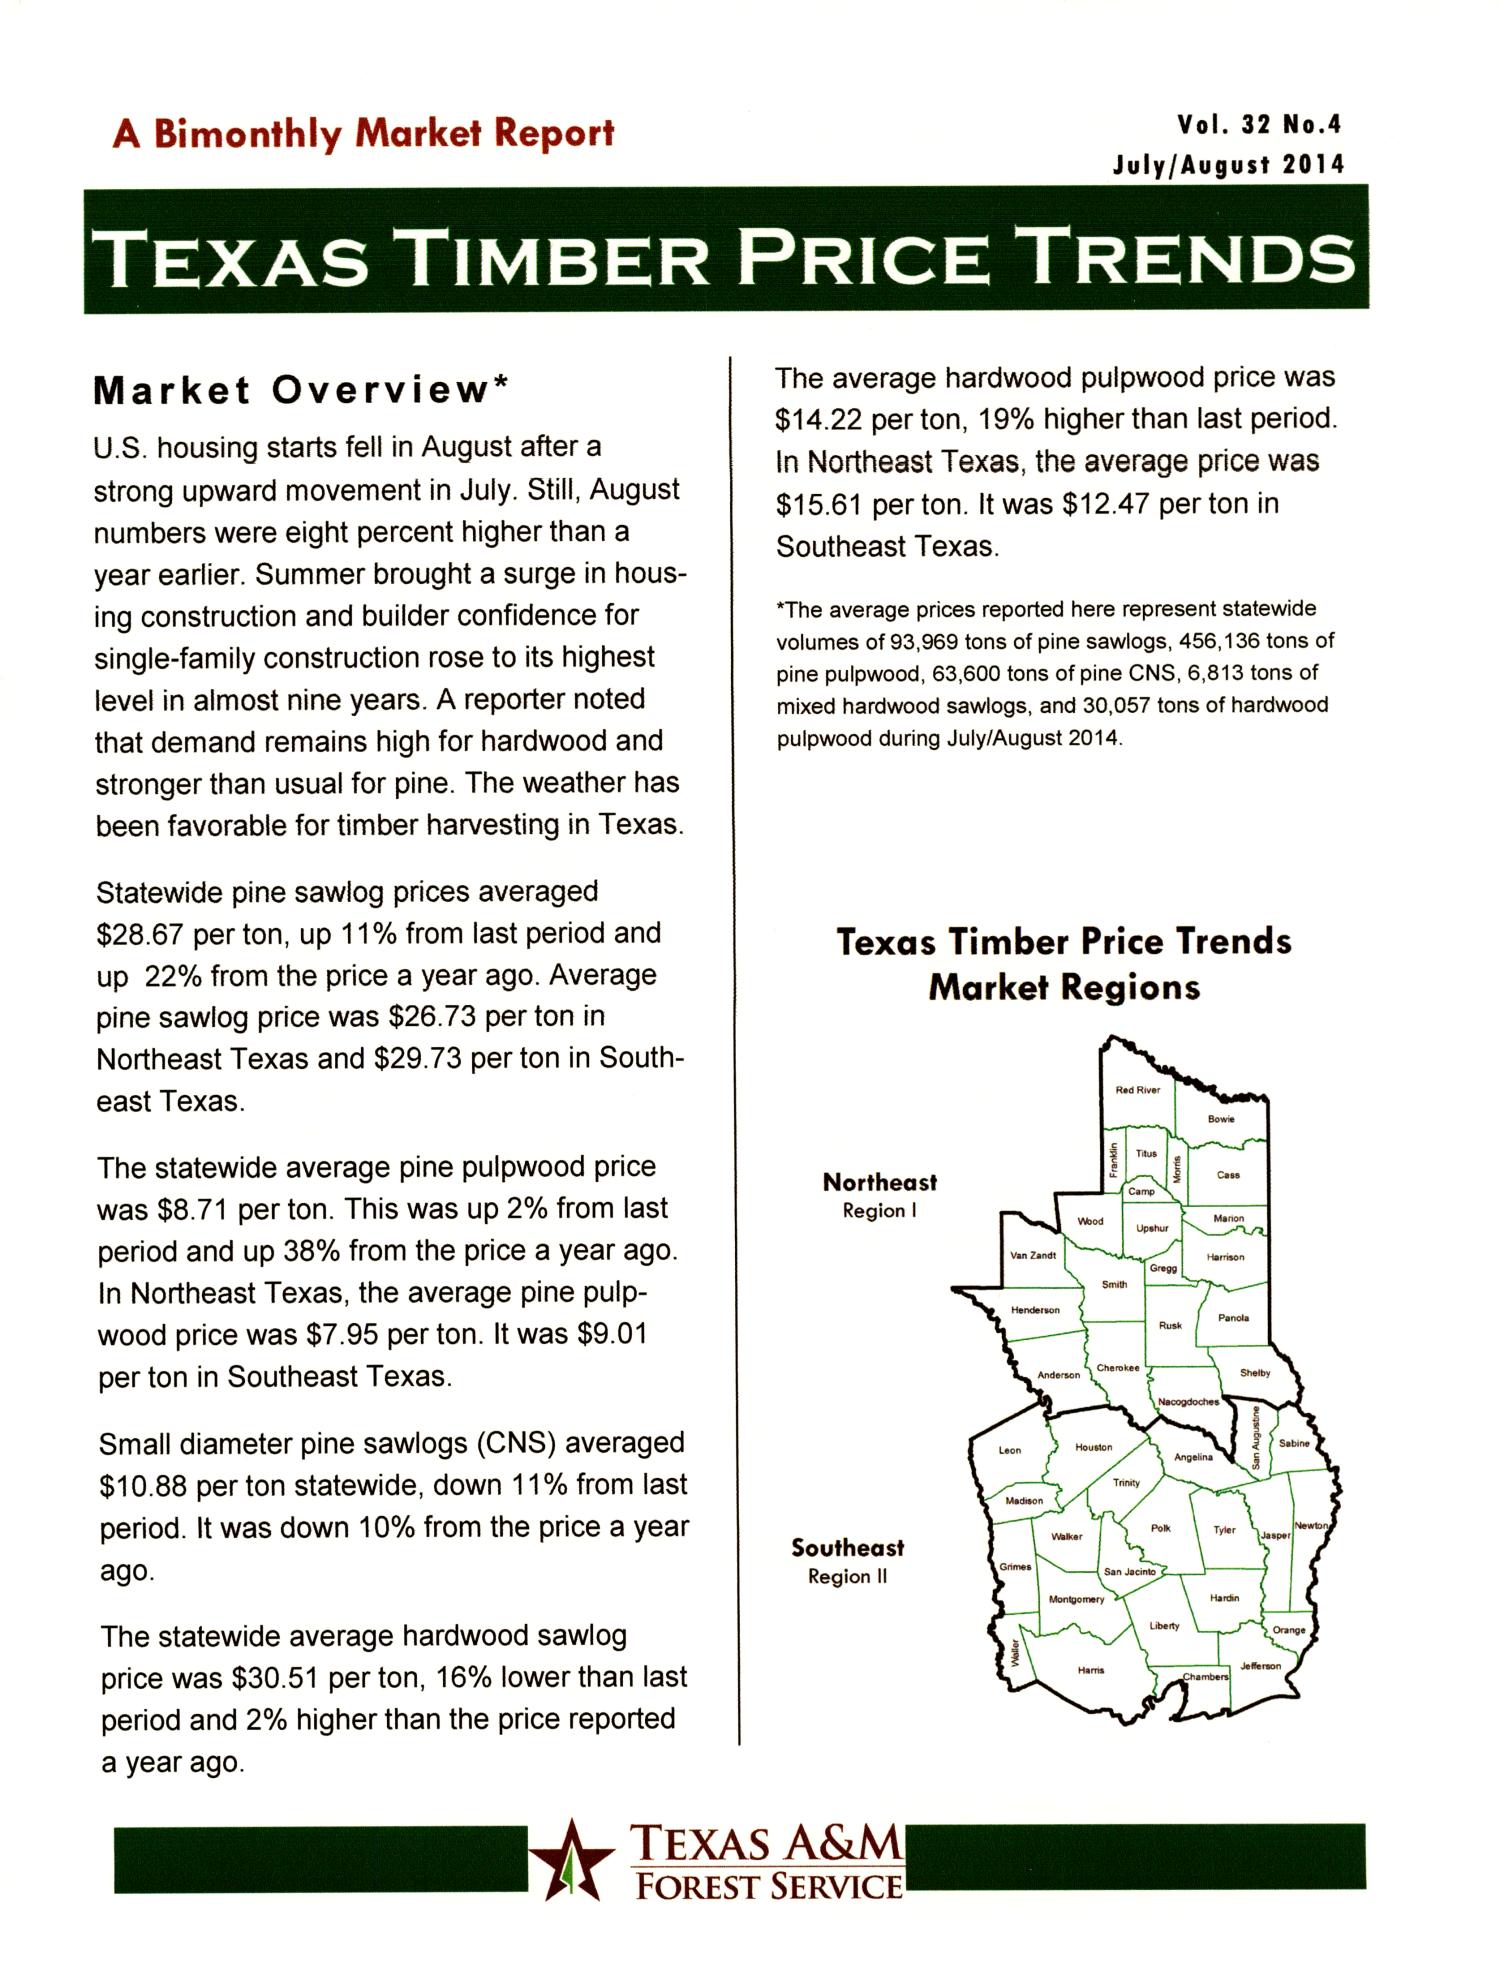 Texas Timber Price Trends, Volume 32, Number 4, July/August 2014
                                                
                                                    Page1
                                                